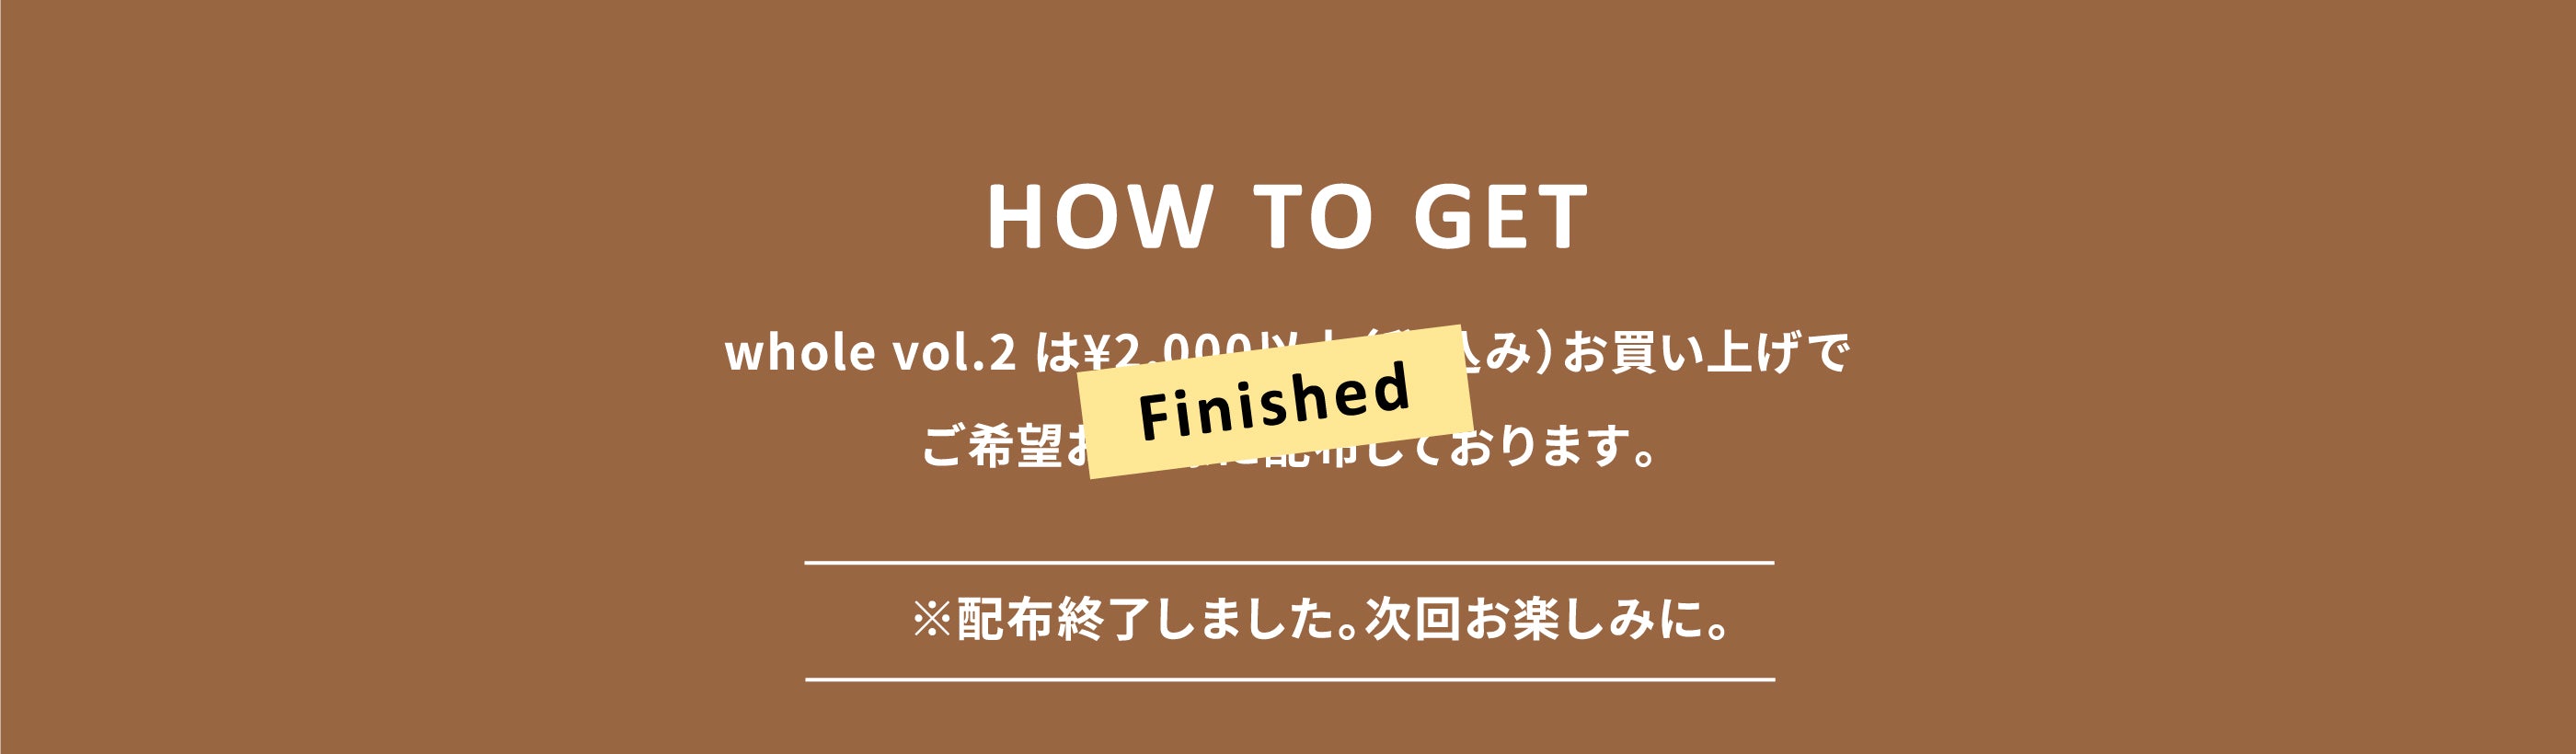 HOWTOGET